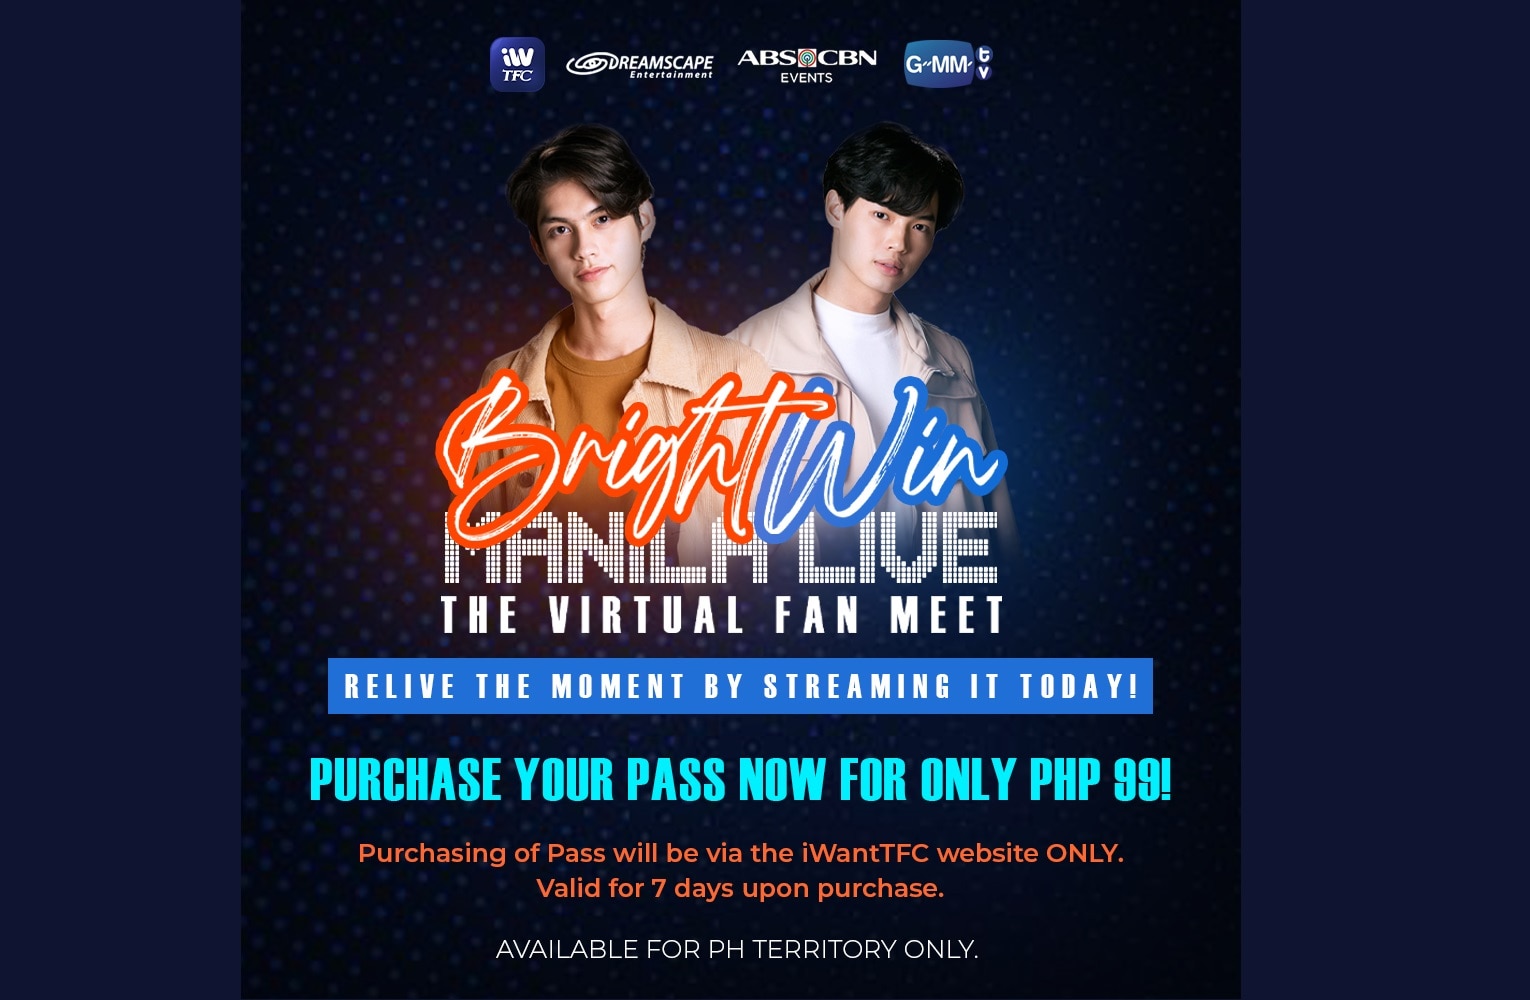 BrightWin's virtual fan meet with Pinoys now available via pay-per-view on iWantTFC